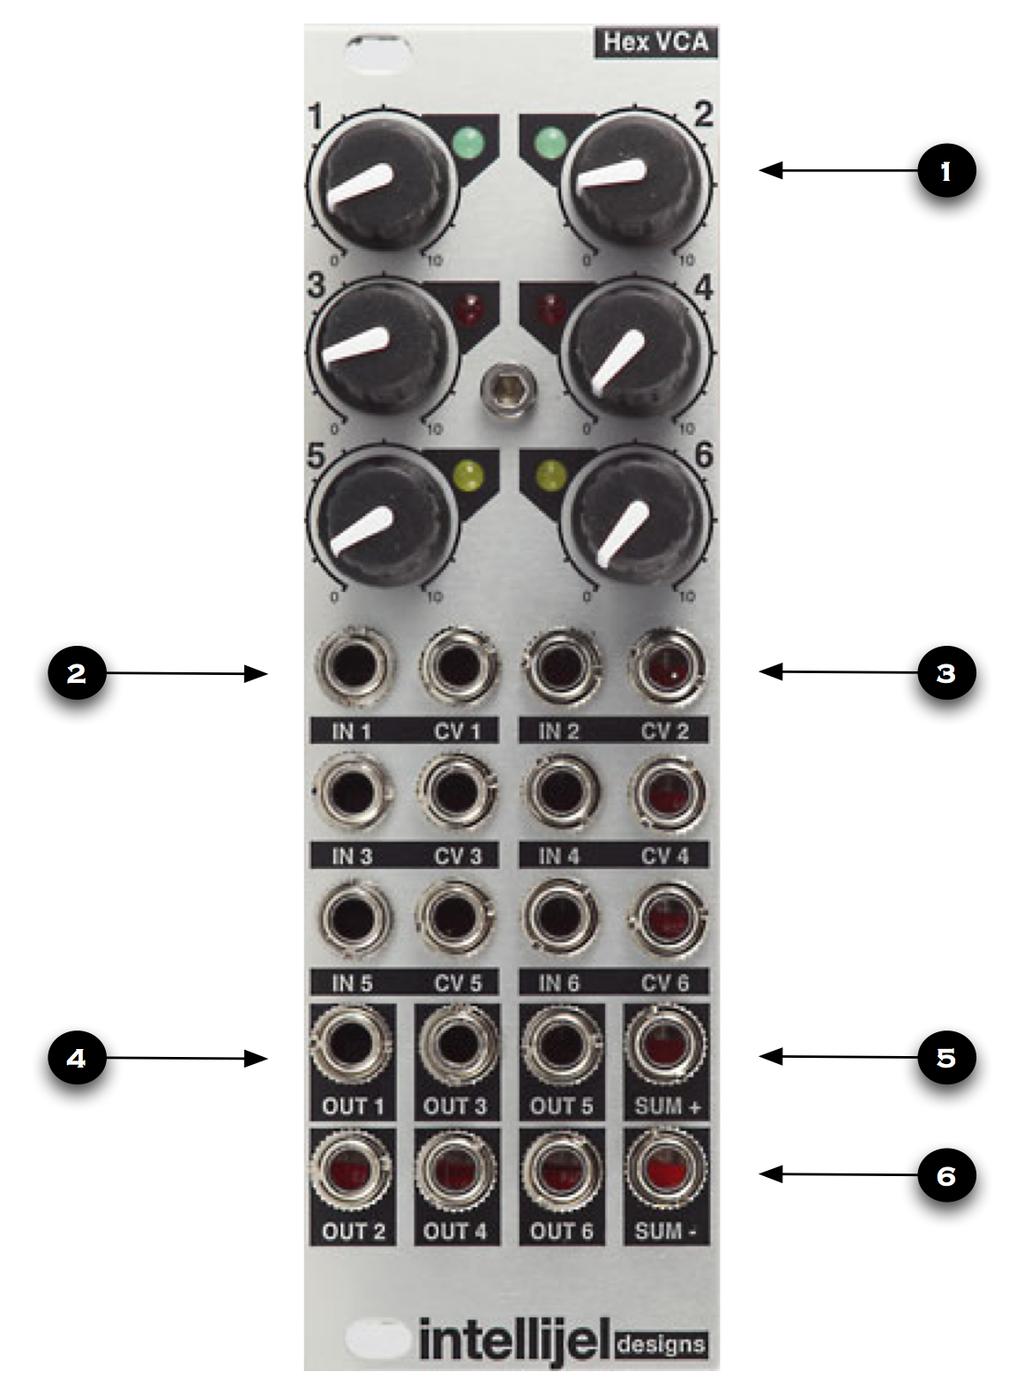 HexVCA Manual v1.0 The HexVCA contains six separate DC coupled logarithmic VCAs that have their outputs normalled to two outputs.